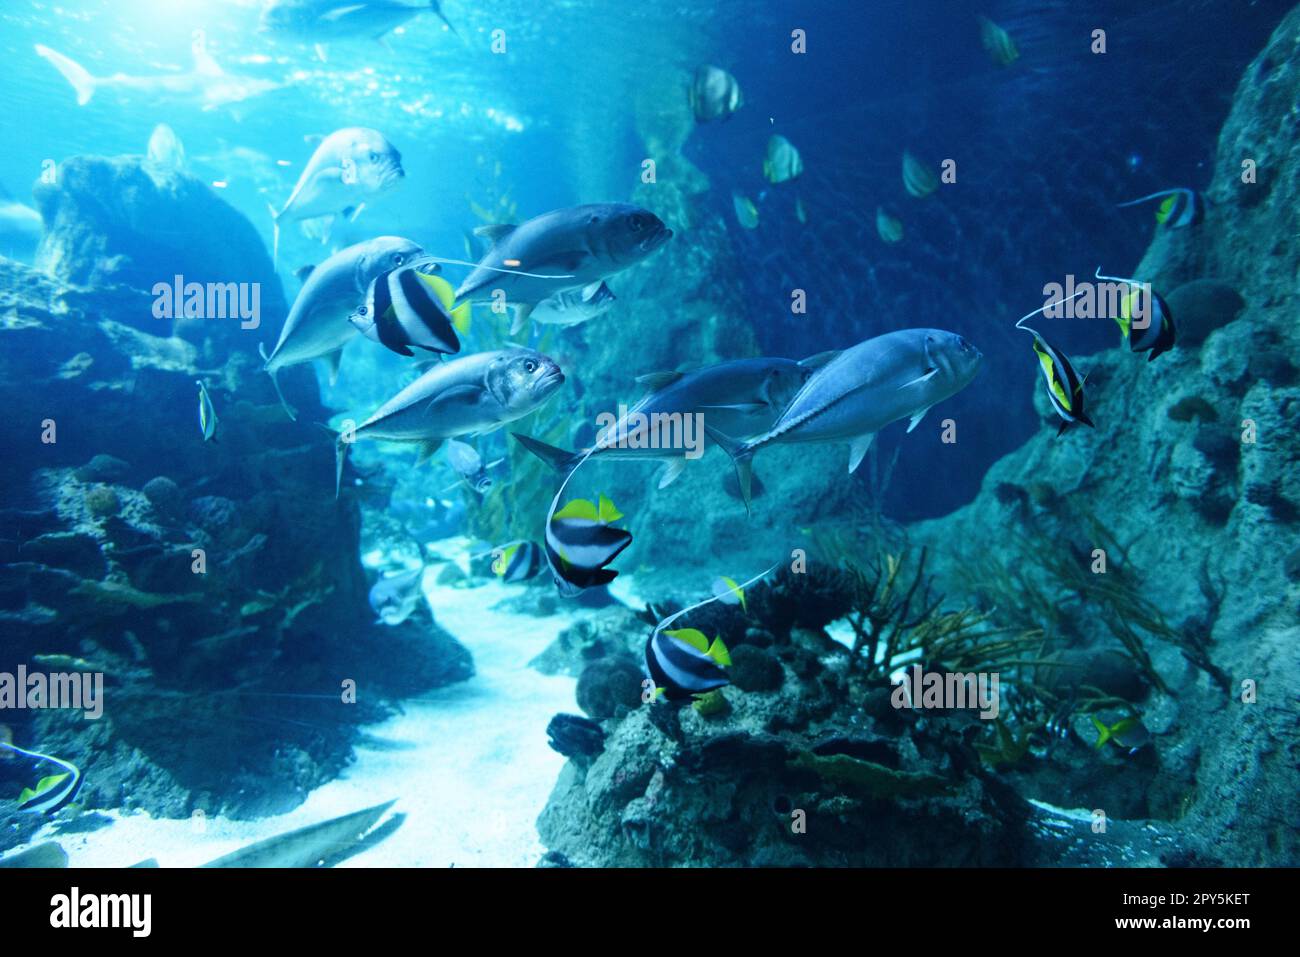 Marine ecosystem with tropical fish and reef in the deep sea Stock Photo